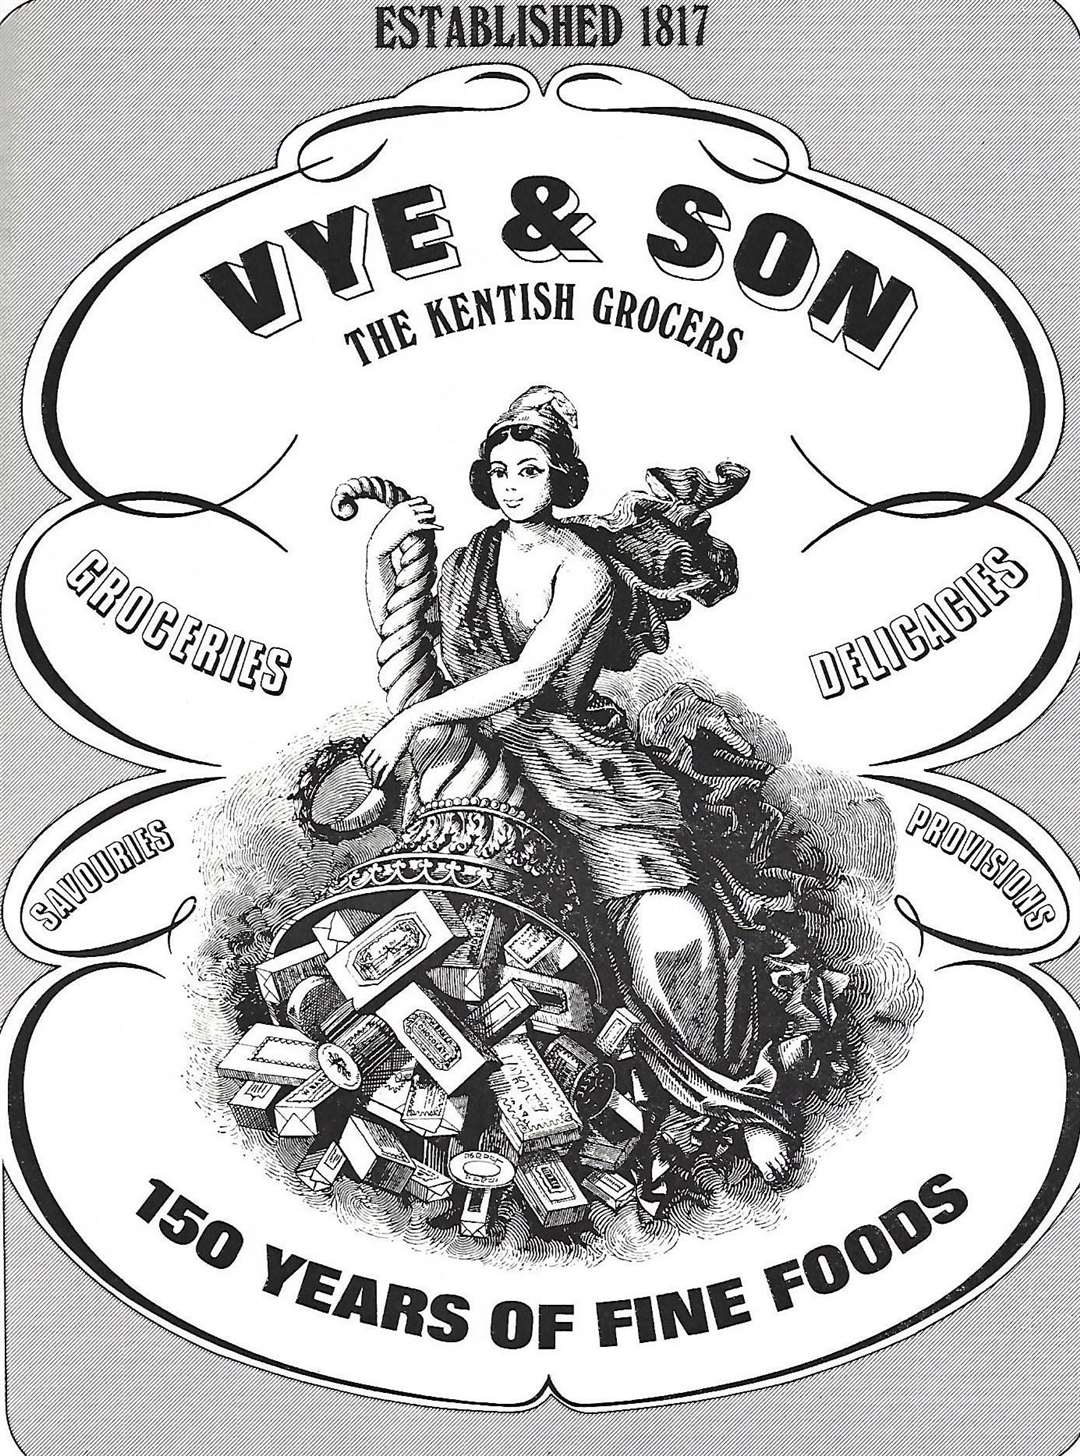 A 1967 advert for Vye and Son